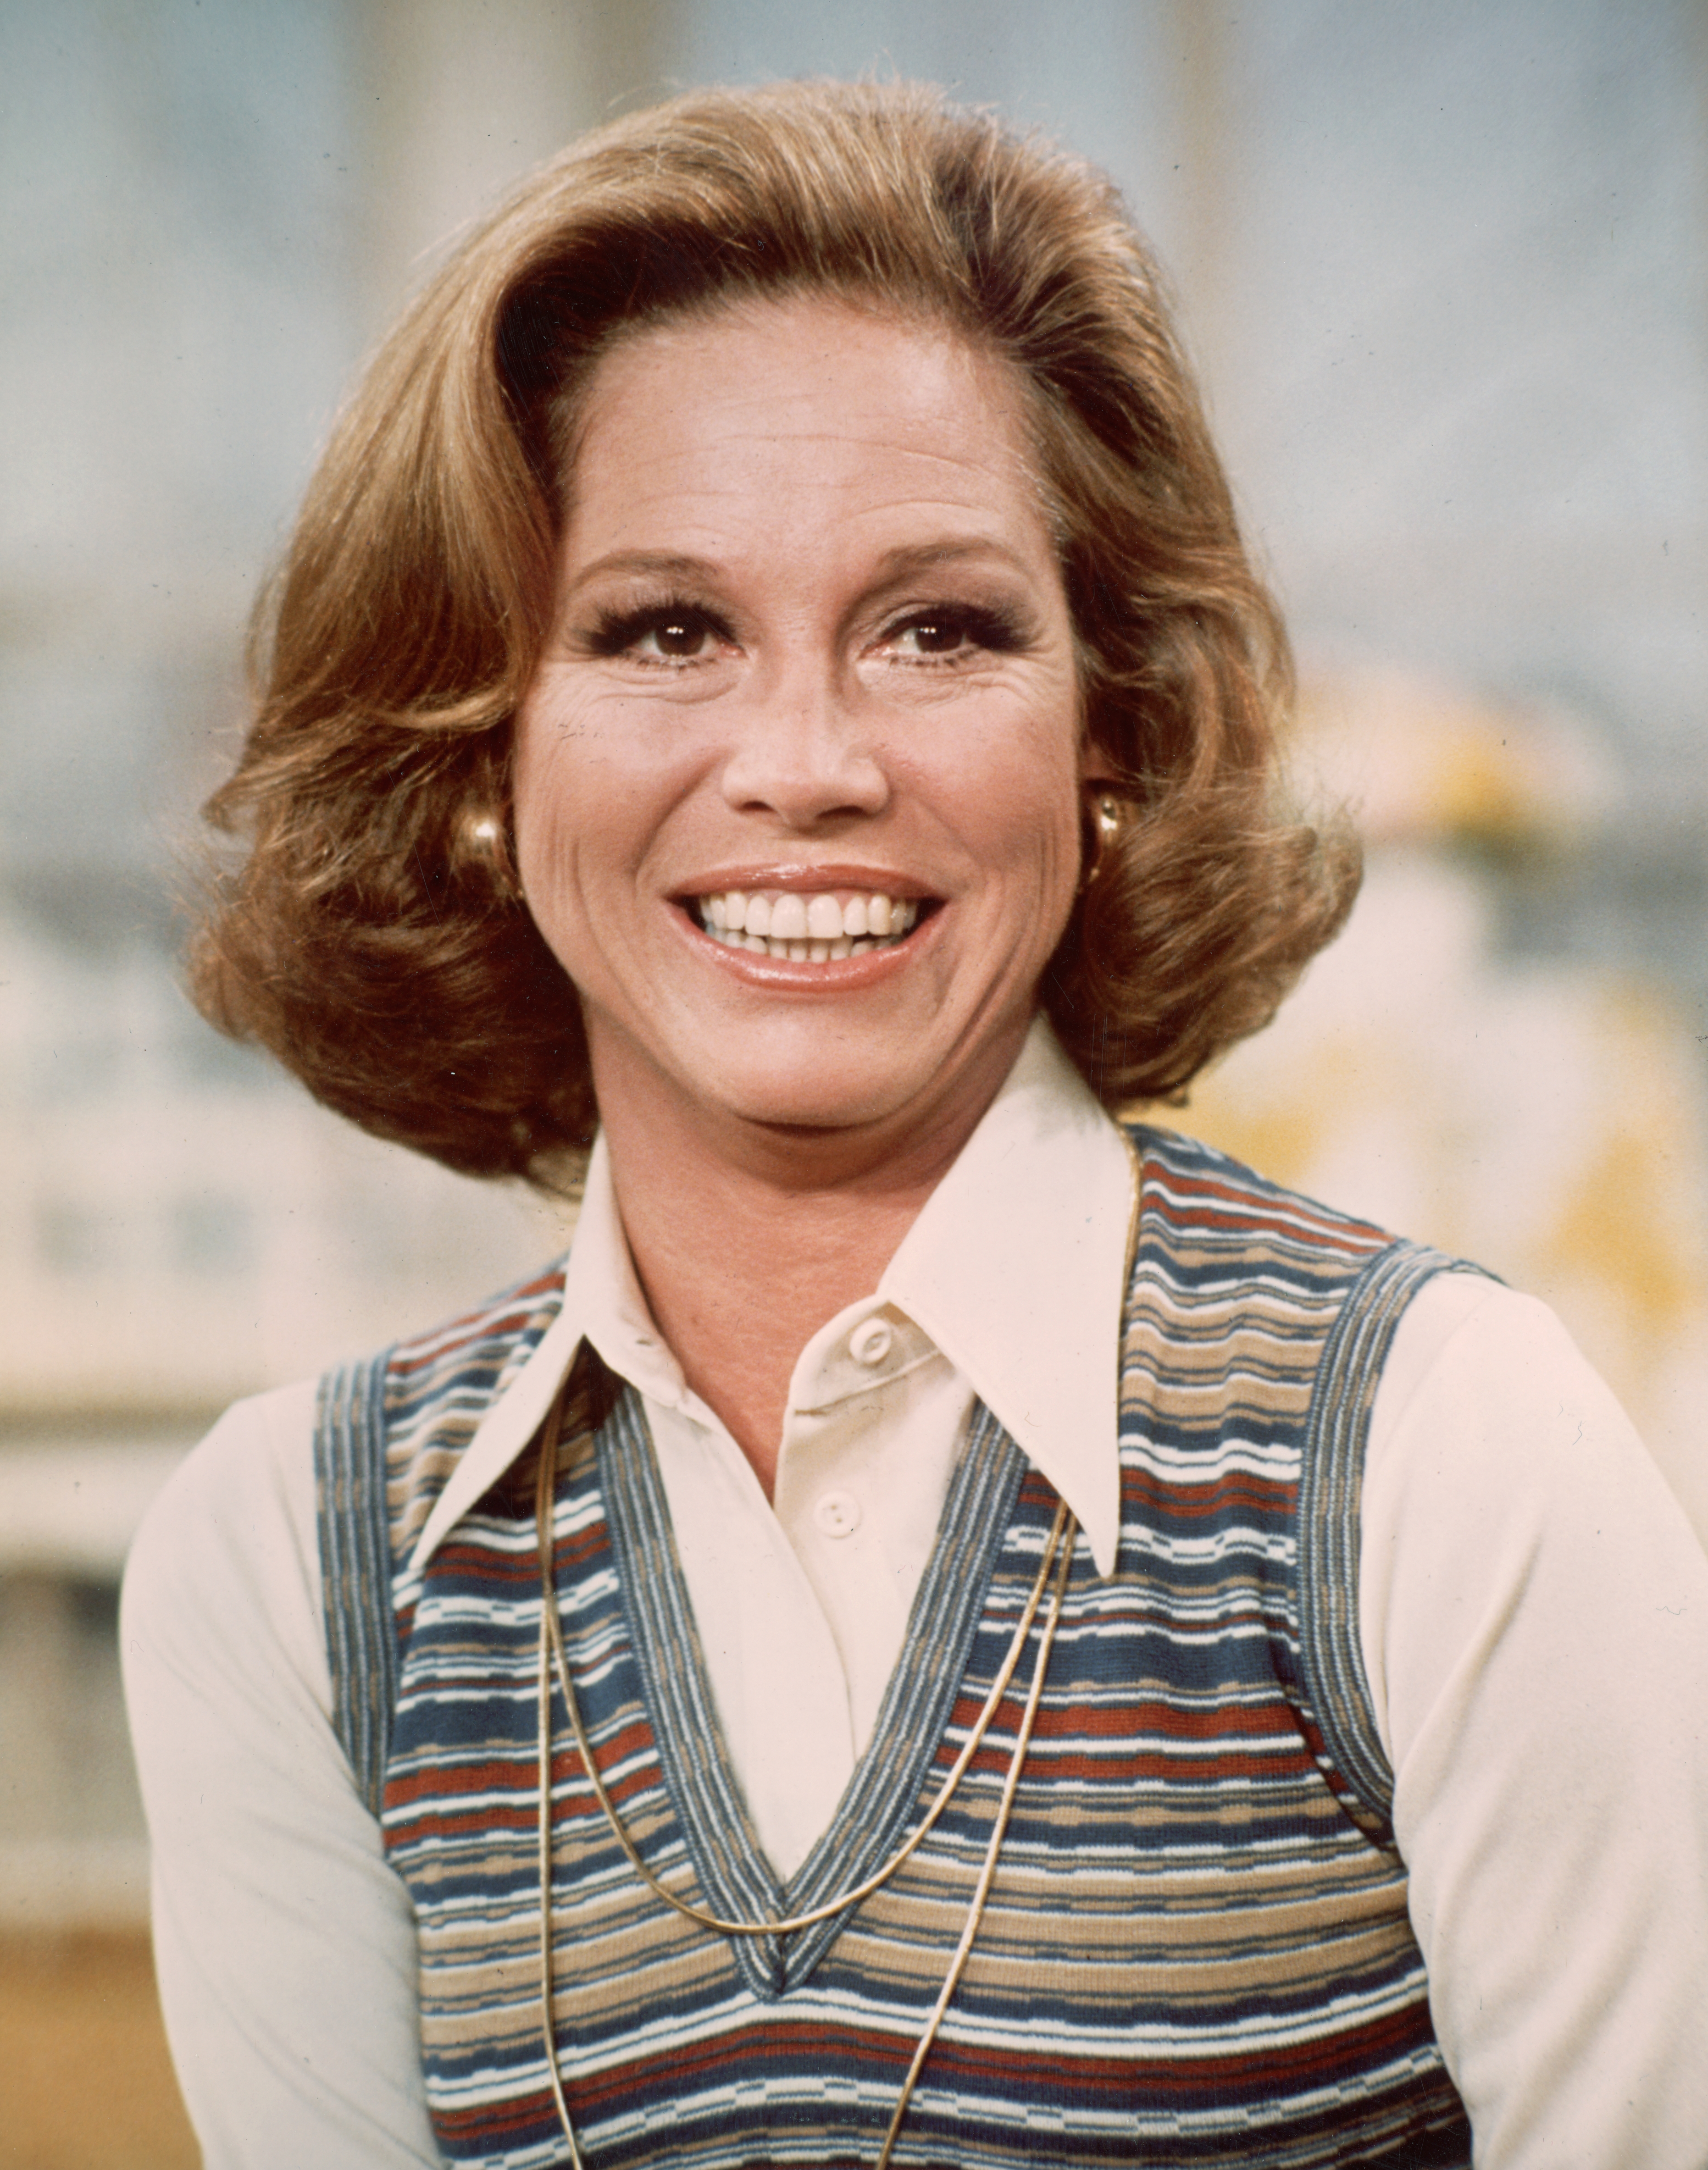 American actor Mary Tyler Moore smiling in a headshot still from the television series, 'The Mary Tyler Moore Show'. Circa 1977 | Source: Getty Images